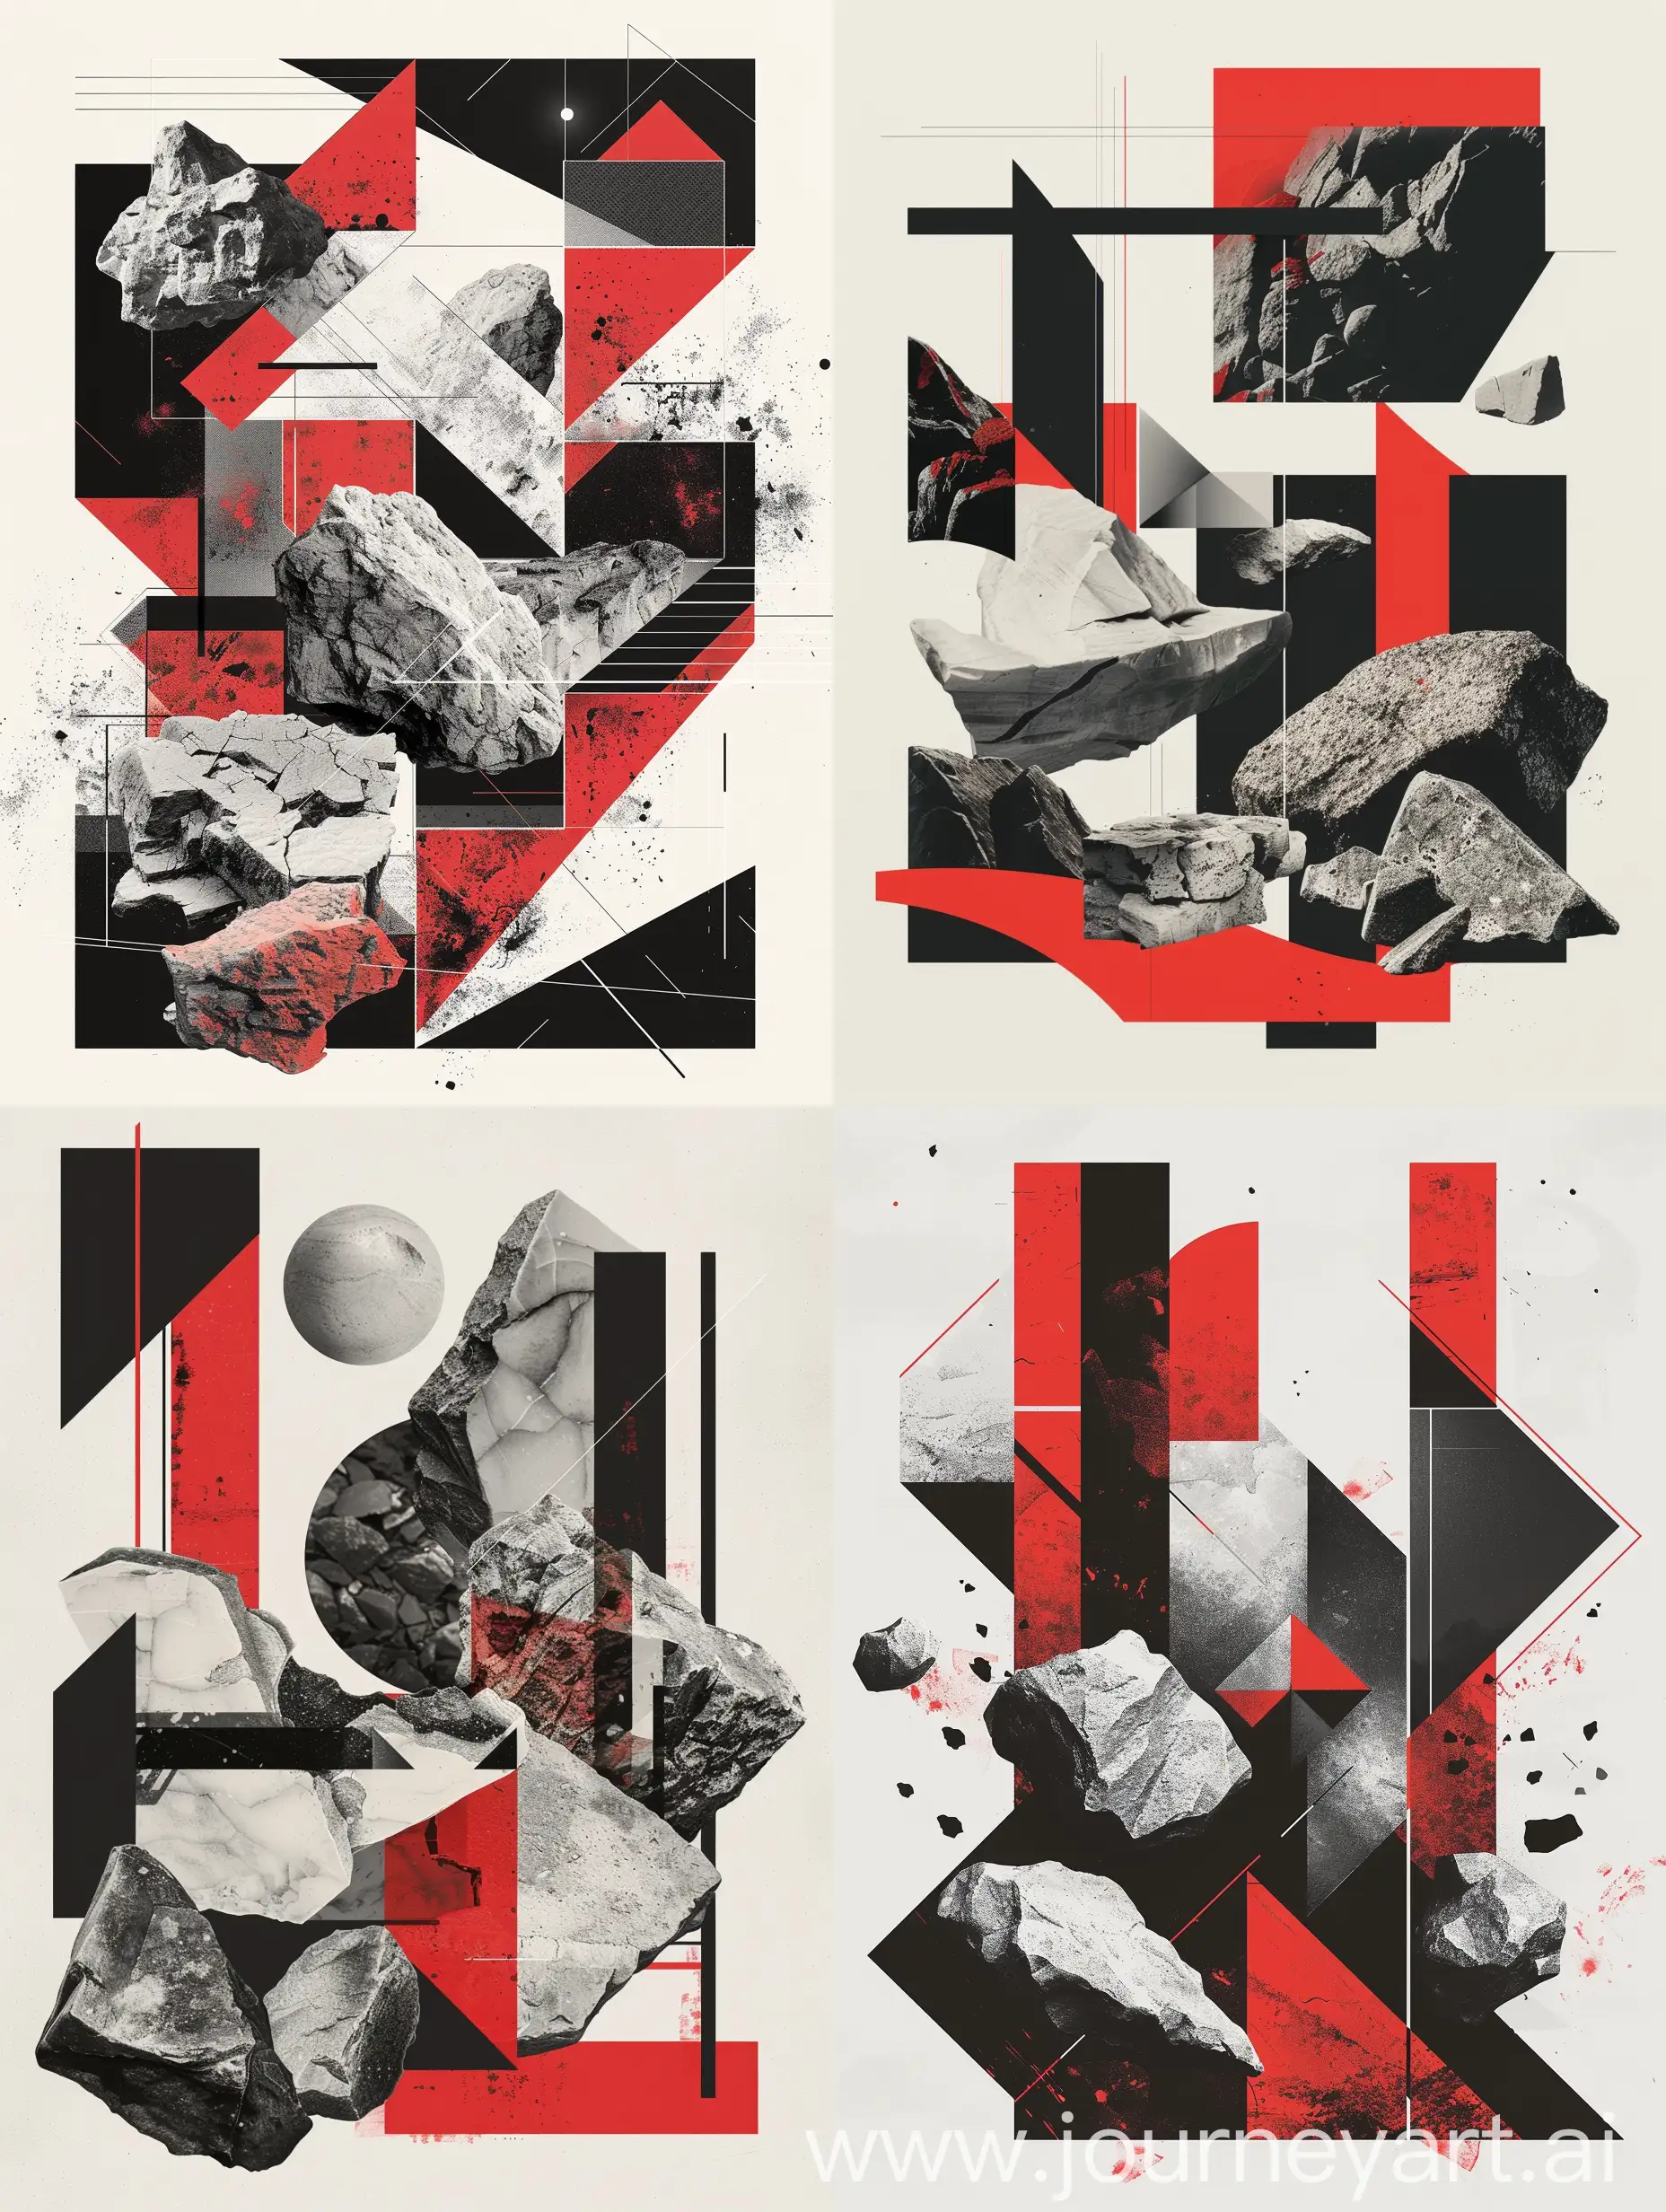 Abstract-Geometric-Poster-Design-in-Red-Black-White-and-Grey-with-Stone-Elements